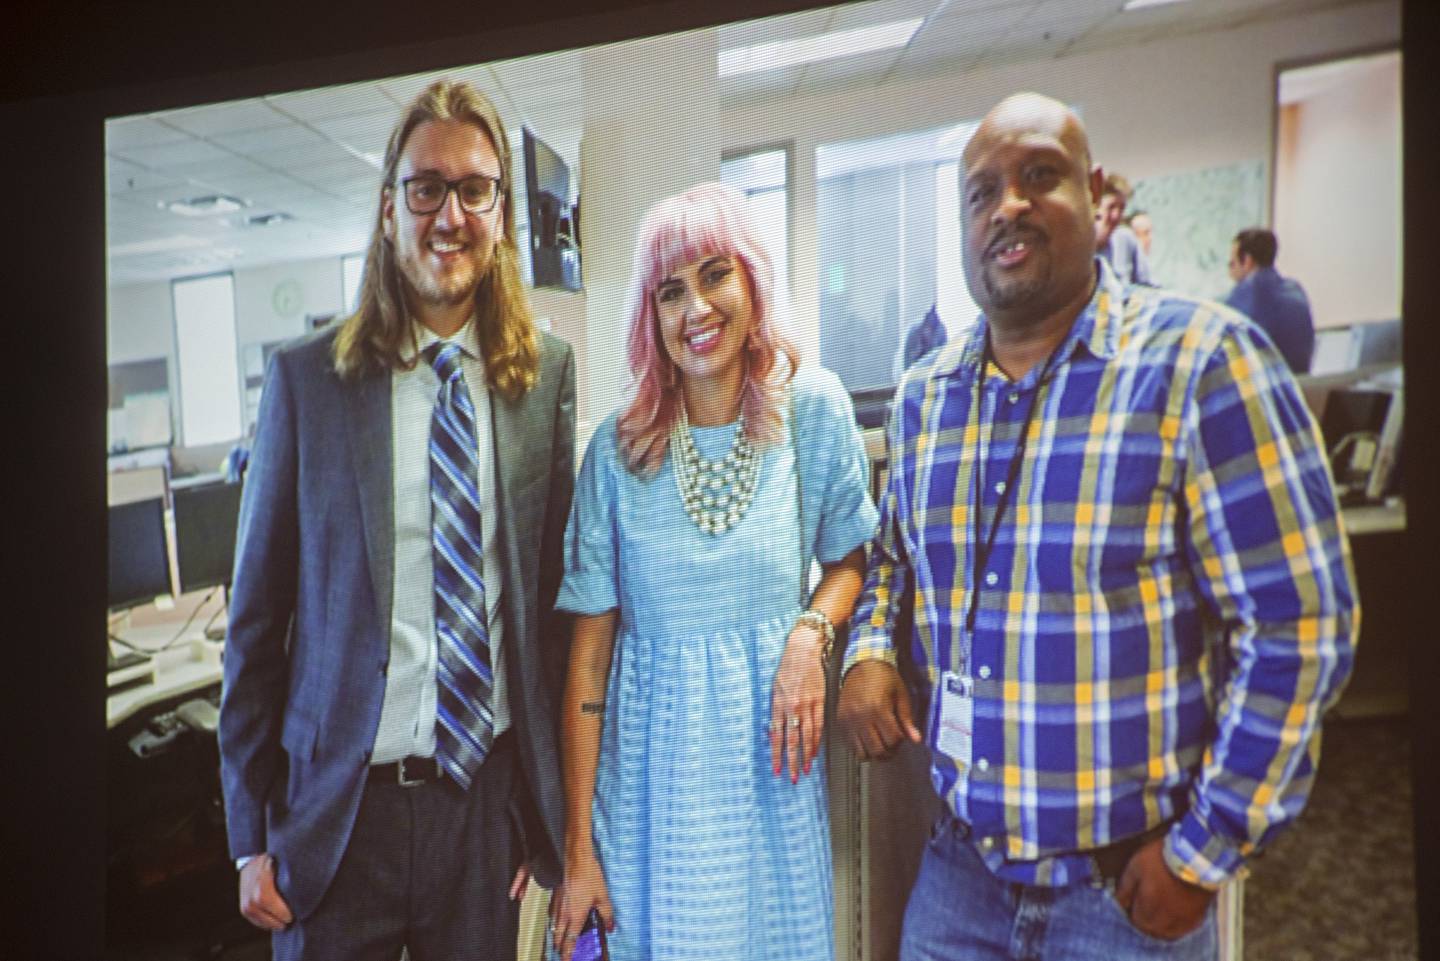 2012 Oregon graduate Eli Murray (left) is seen with Tampa Bay Times colleagues Rebecca Woolington and Corey G. Johnson after having been chosen for the Pulitzer Prize for investigative journalism.